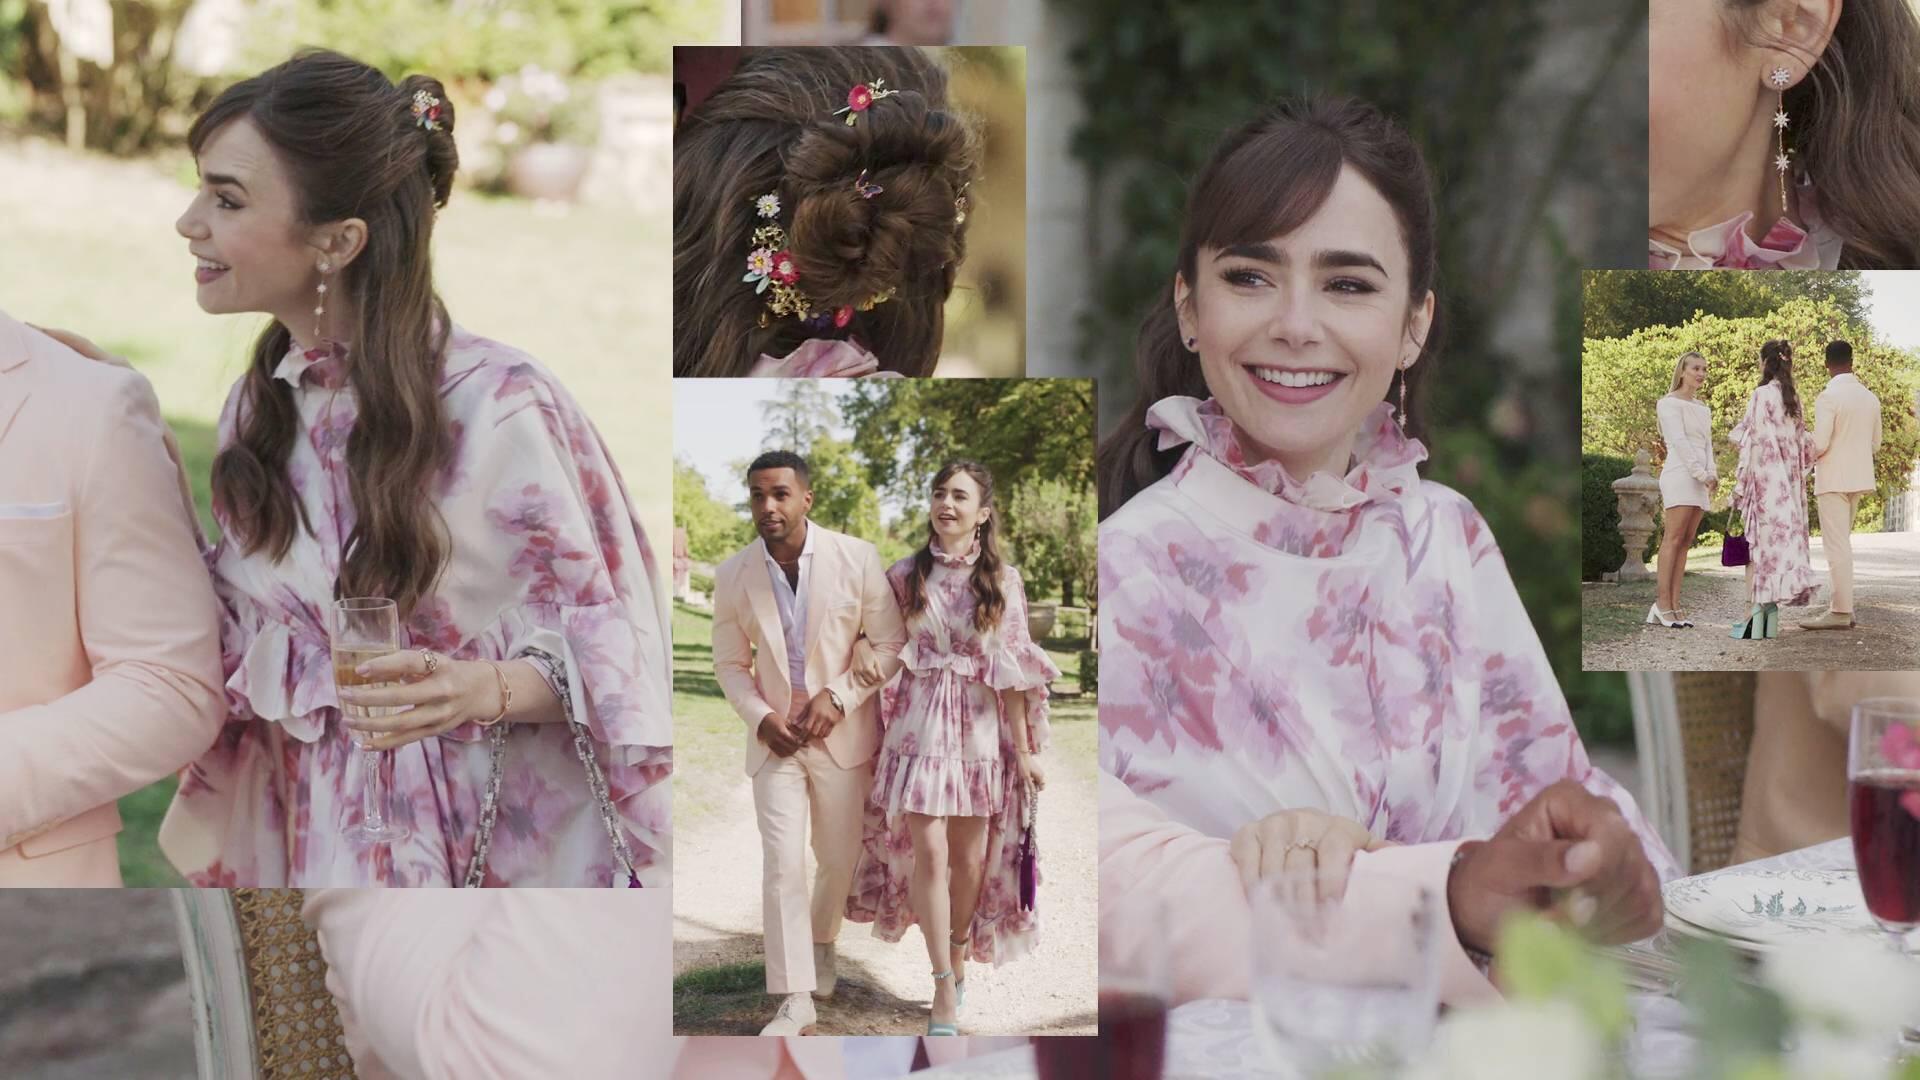 Lily Collins - Emily In Paris | Season 3 Episode 10 | Lily Collins style